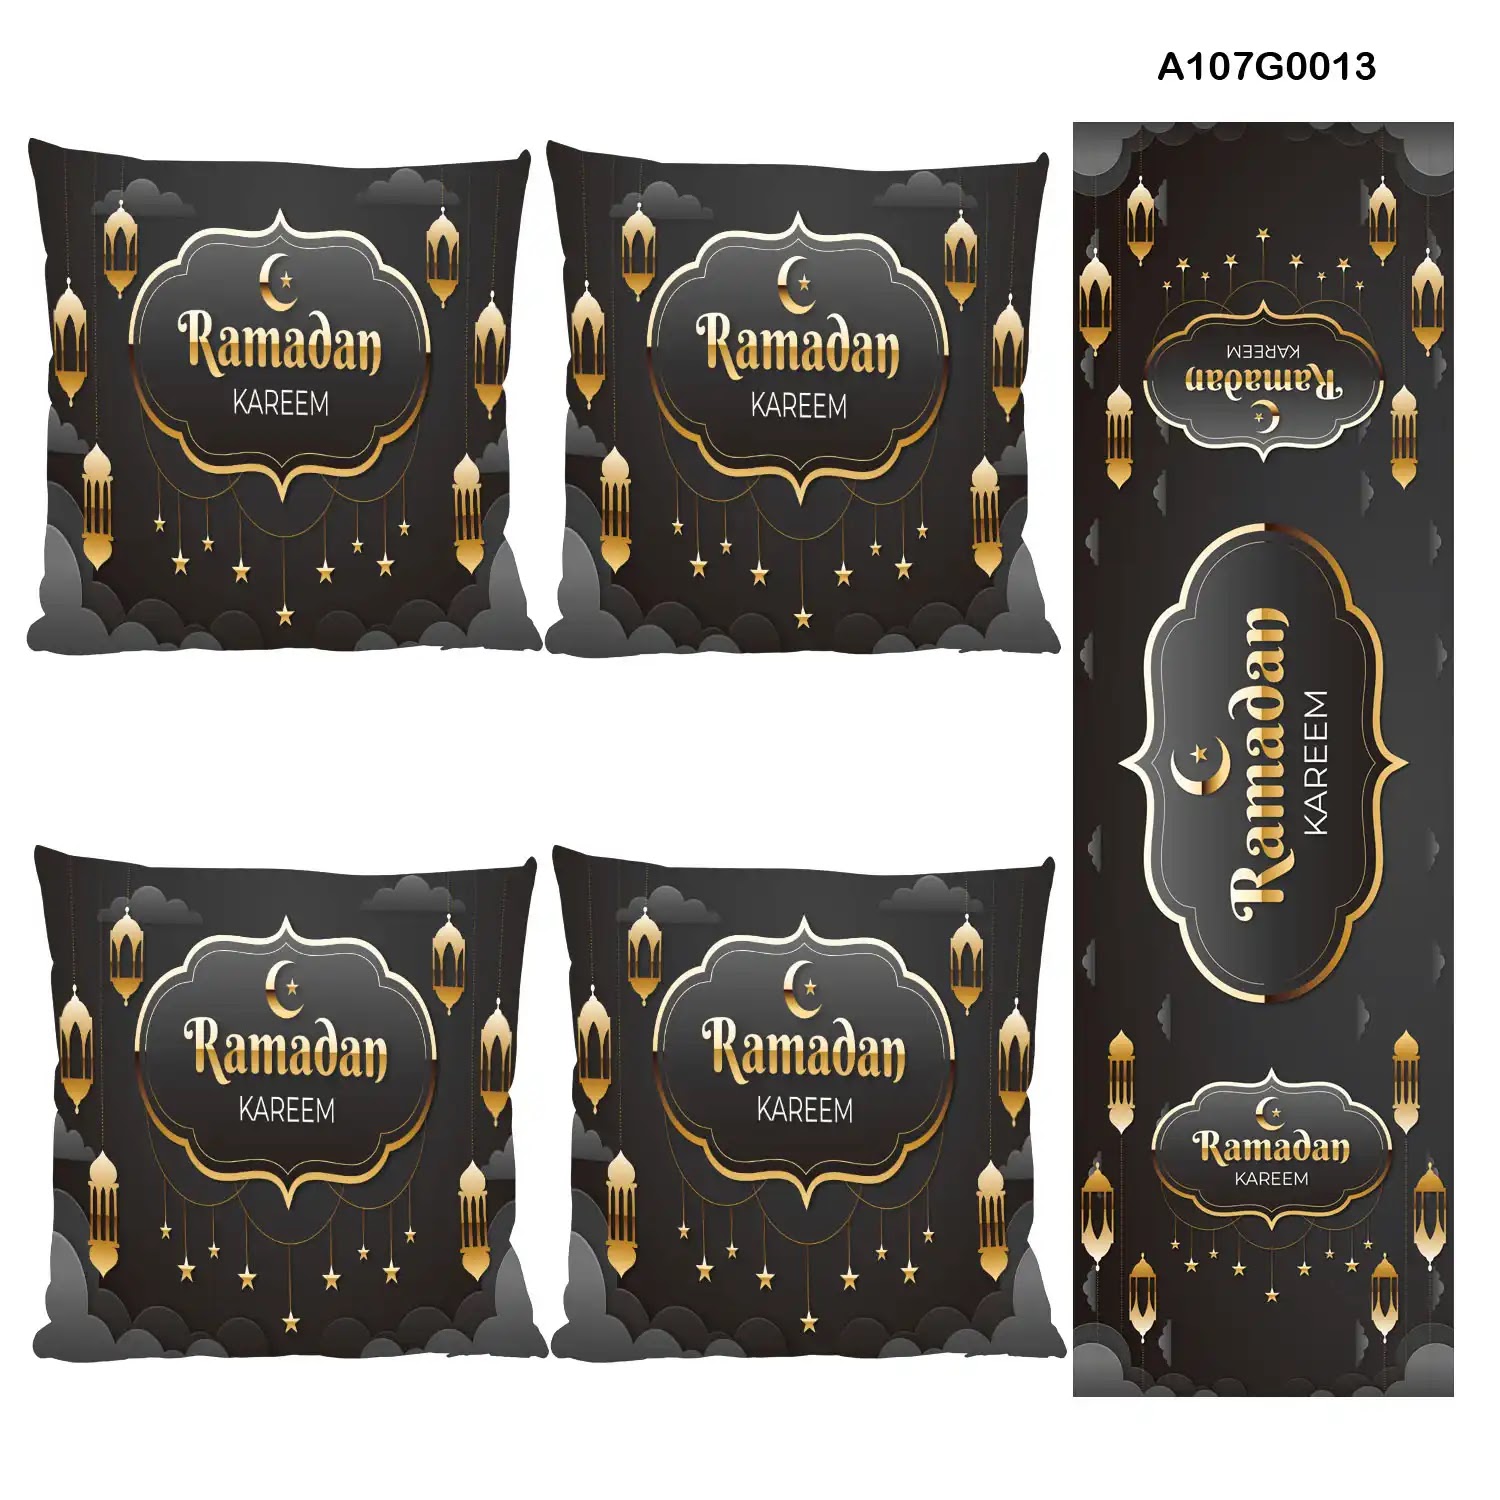 Black and gold Pillow cover set & table runner for Ramadan